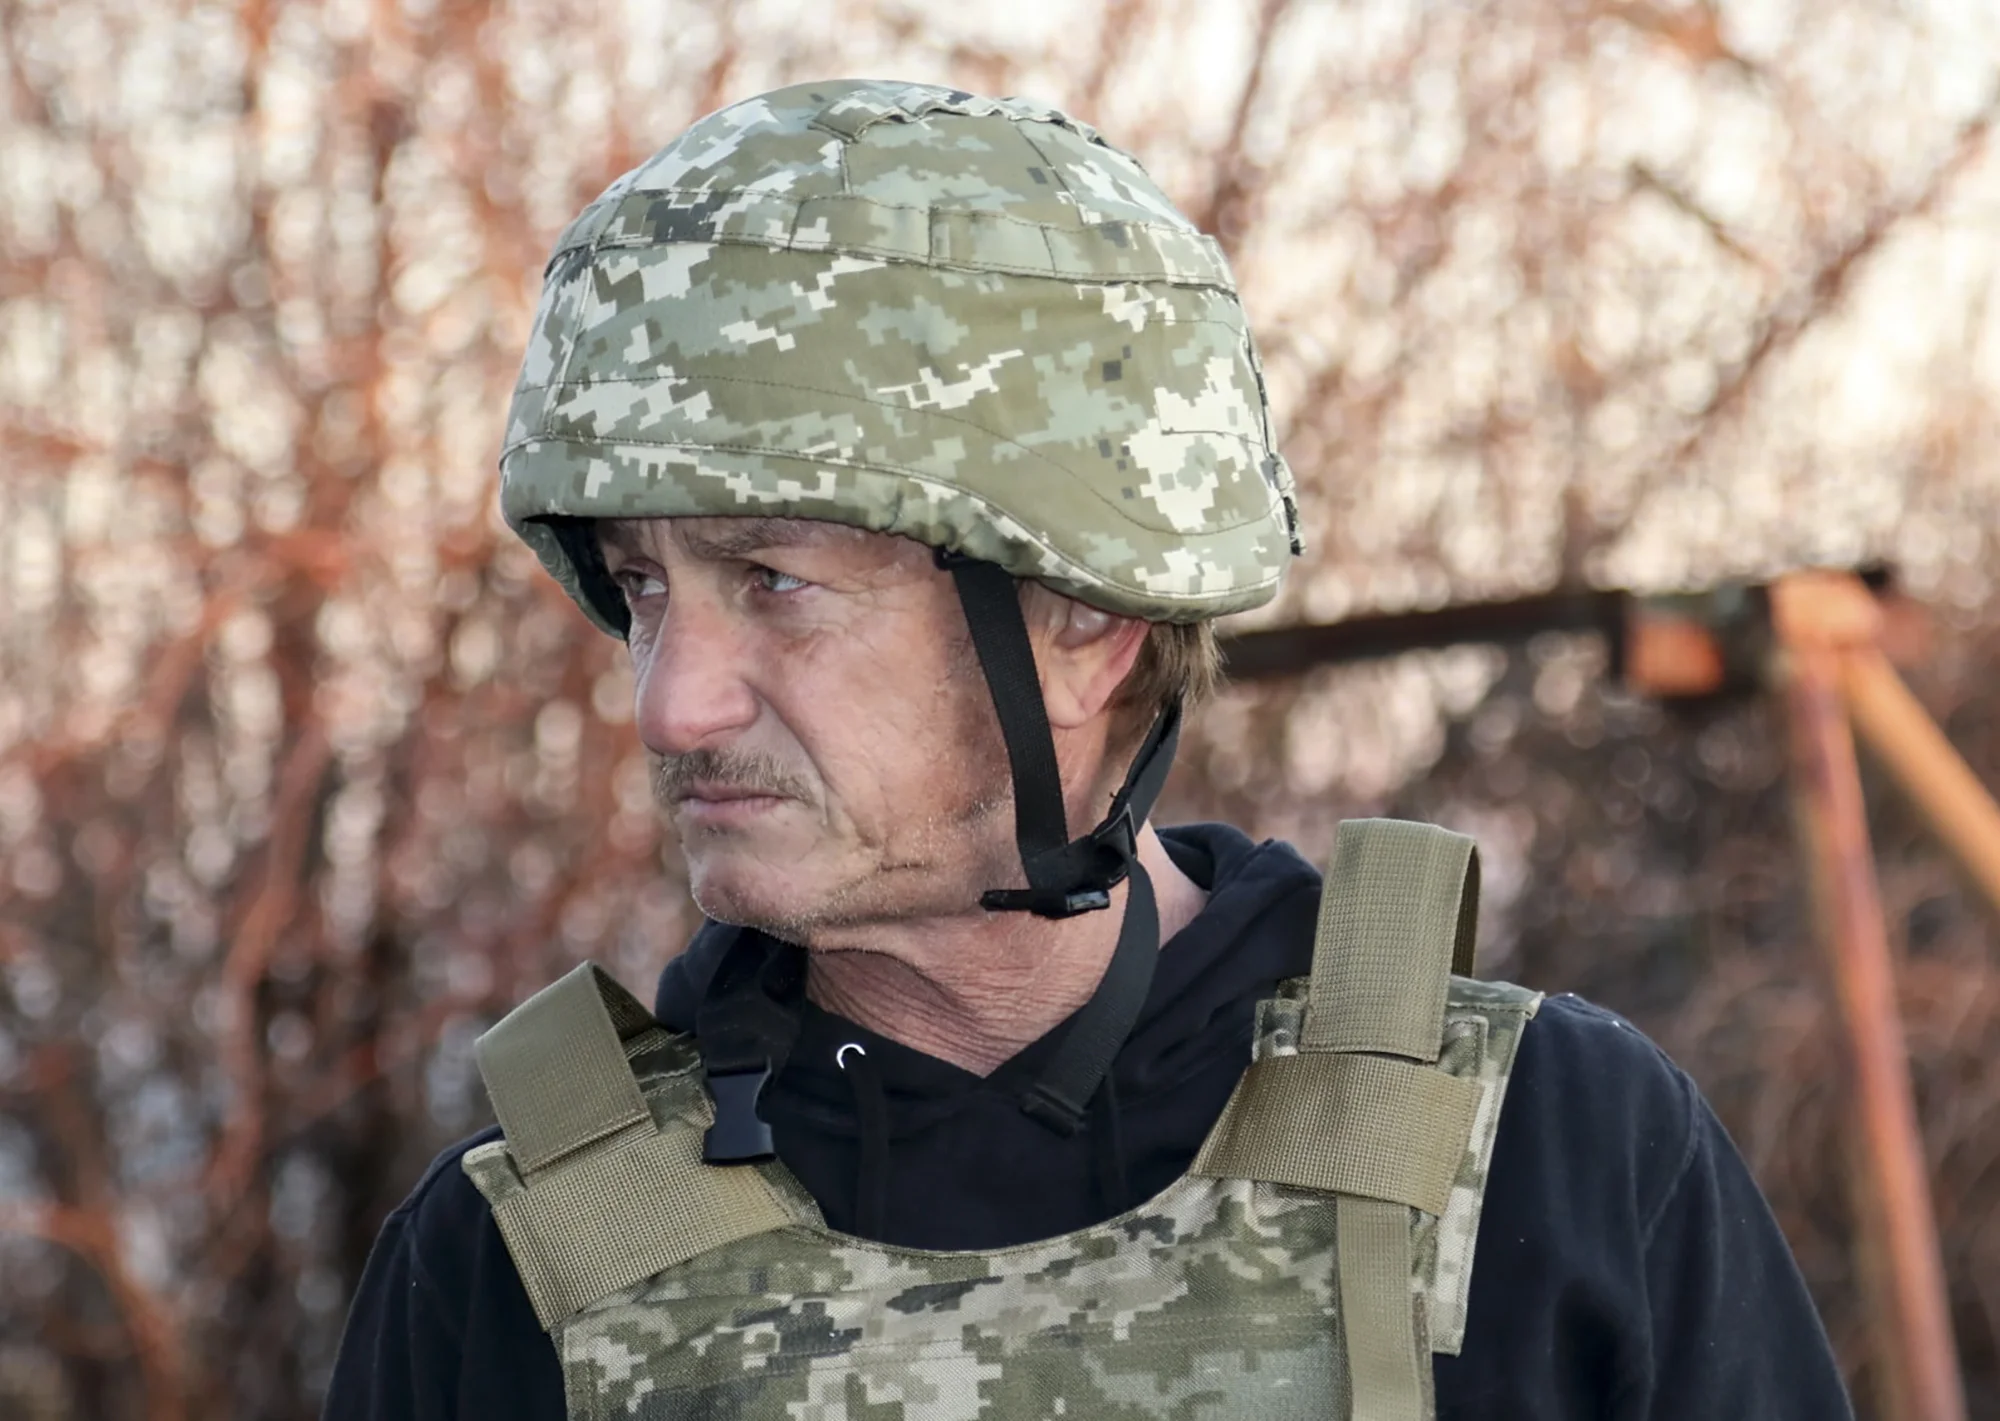 Sean Penn is filming the Russian invasion documentary in Ukraine